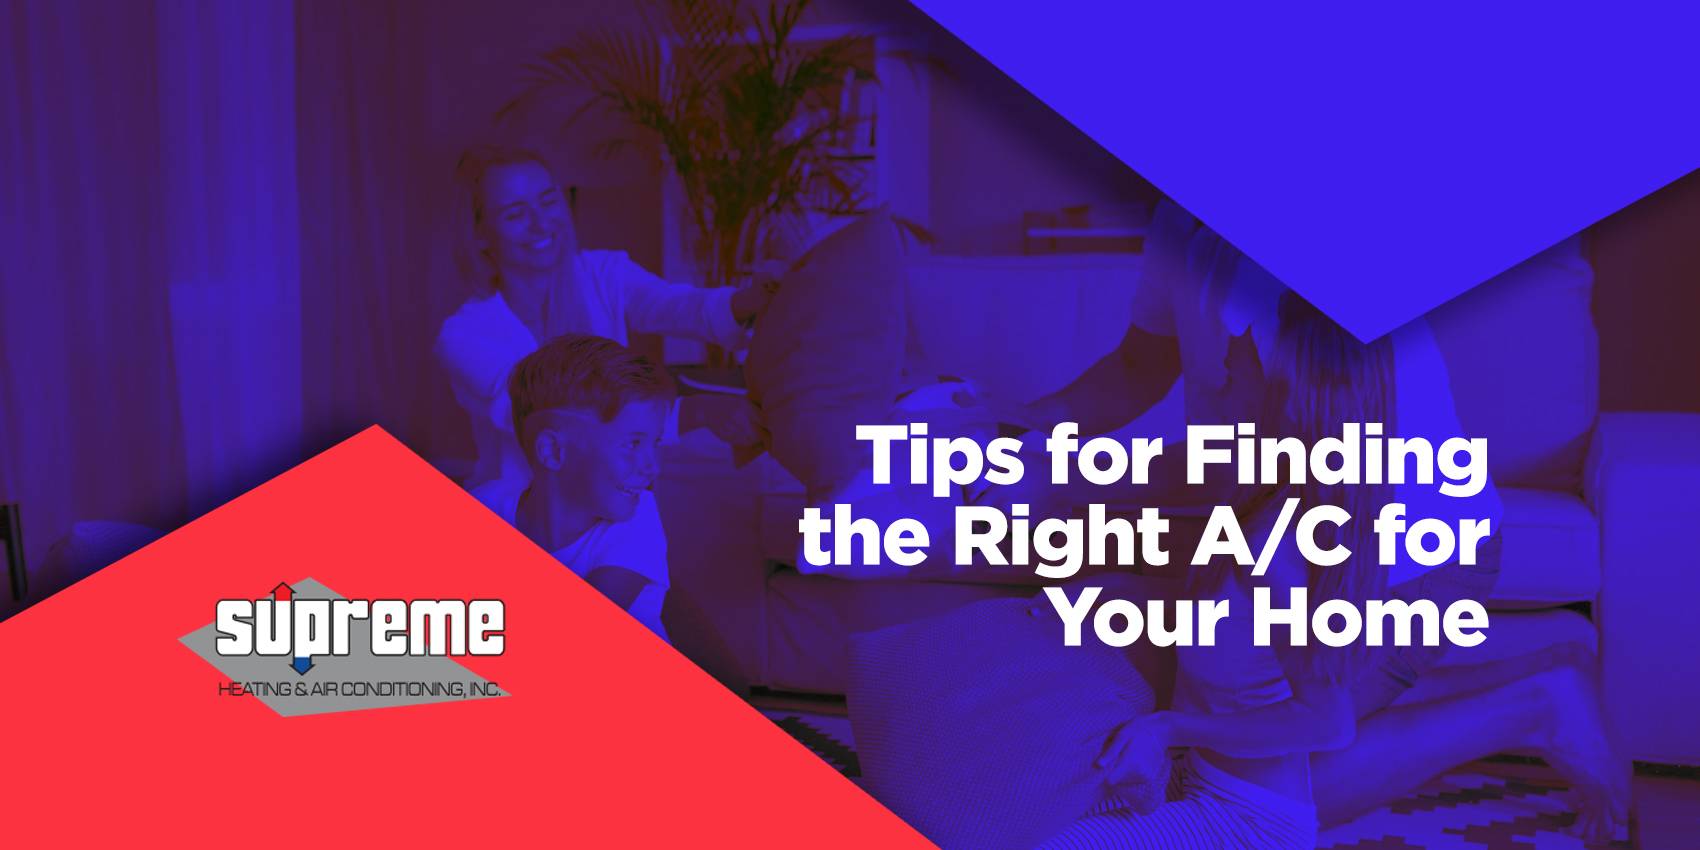 Tips for Finding the Right A/C for Your Home